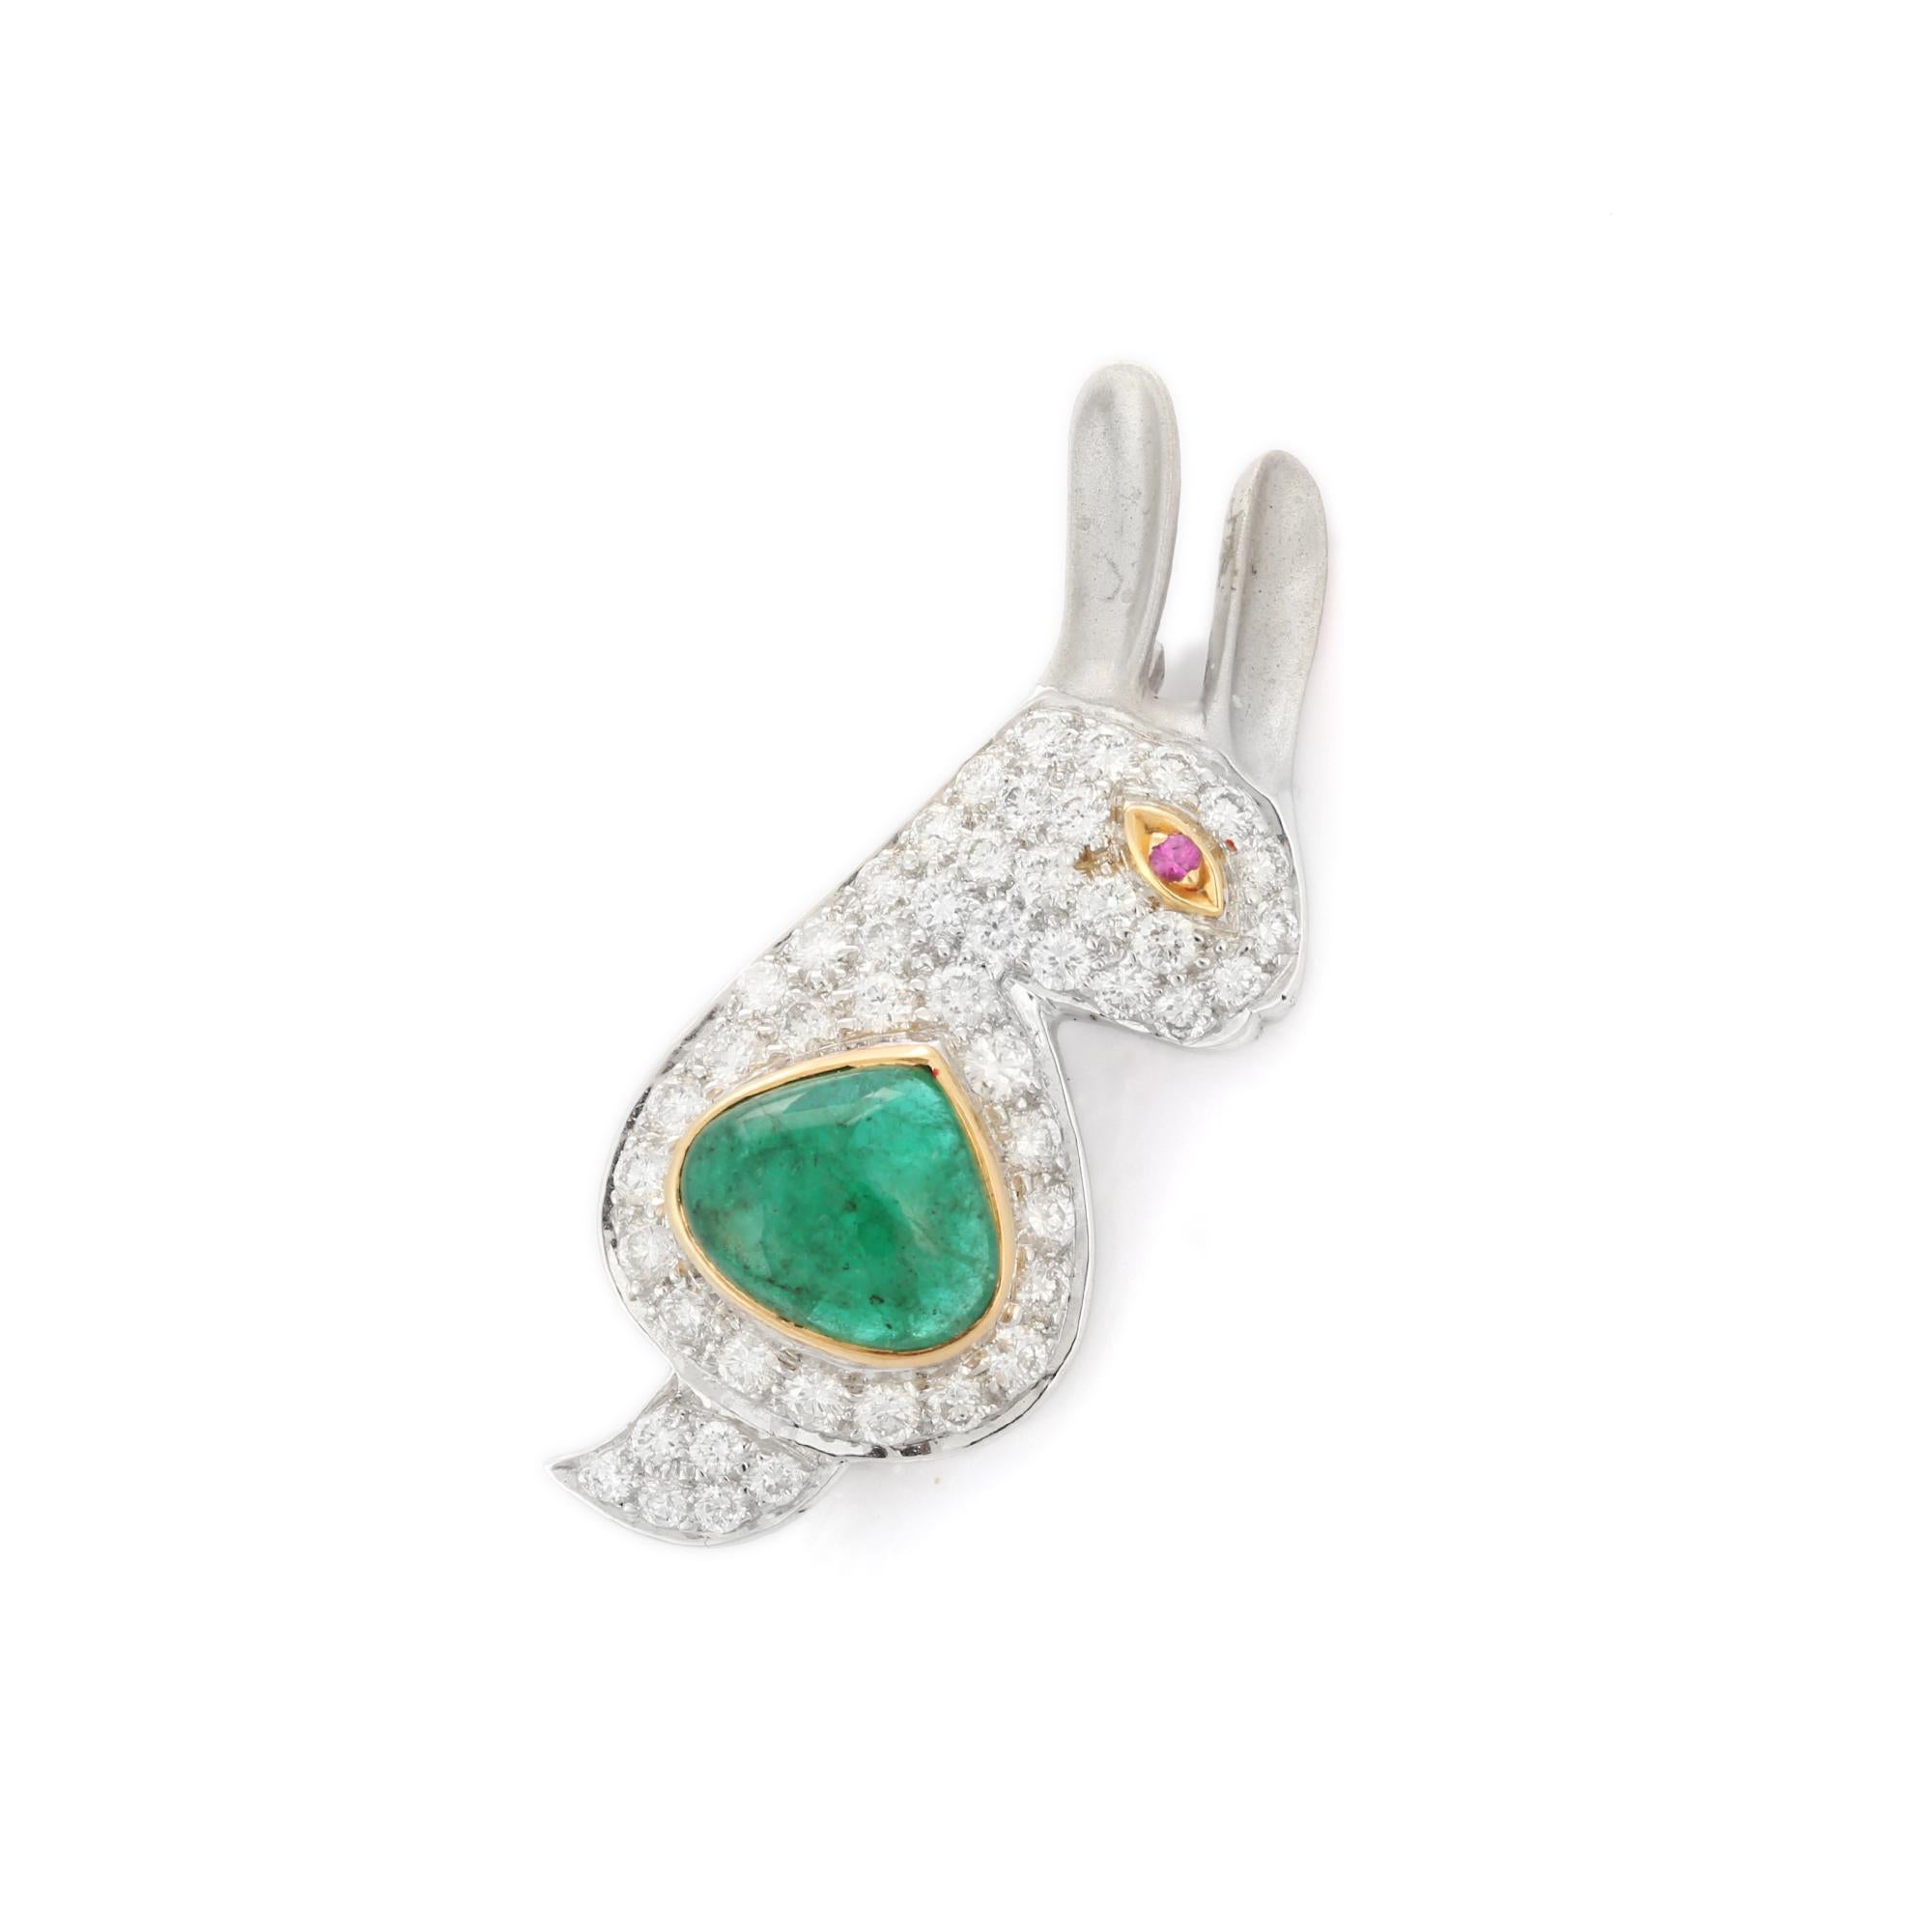 Heart Cut 2.2 Carat Emerald Diamond Rabbit Brooch in 18k Solid White Gold, Unisex Gifts For Sale